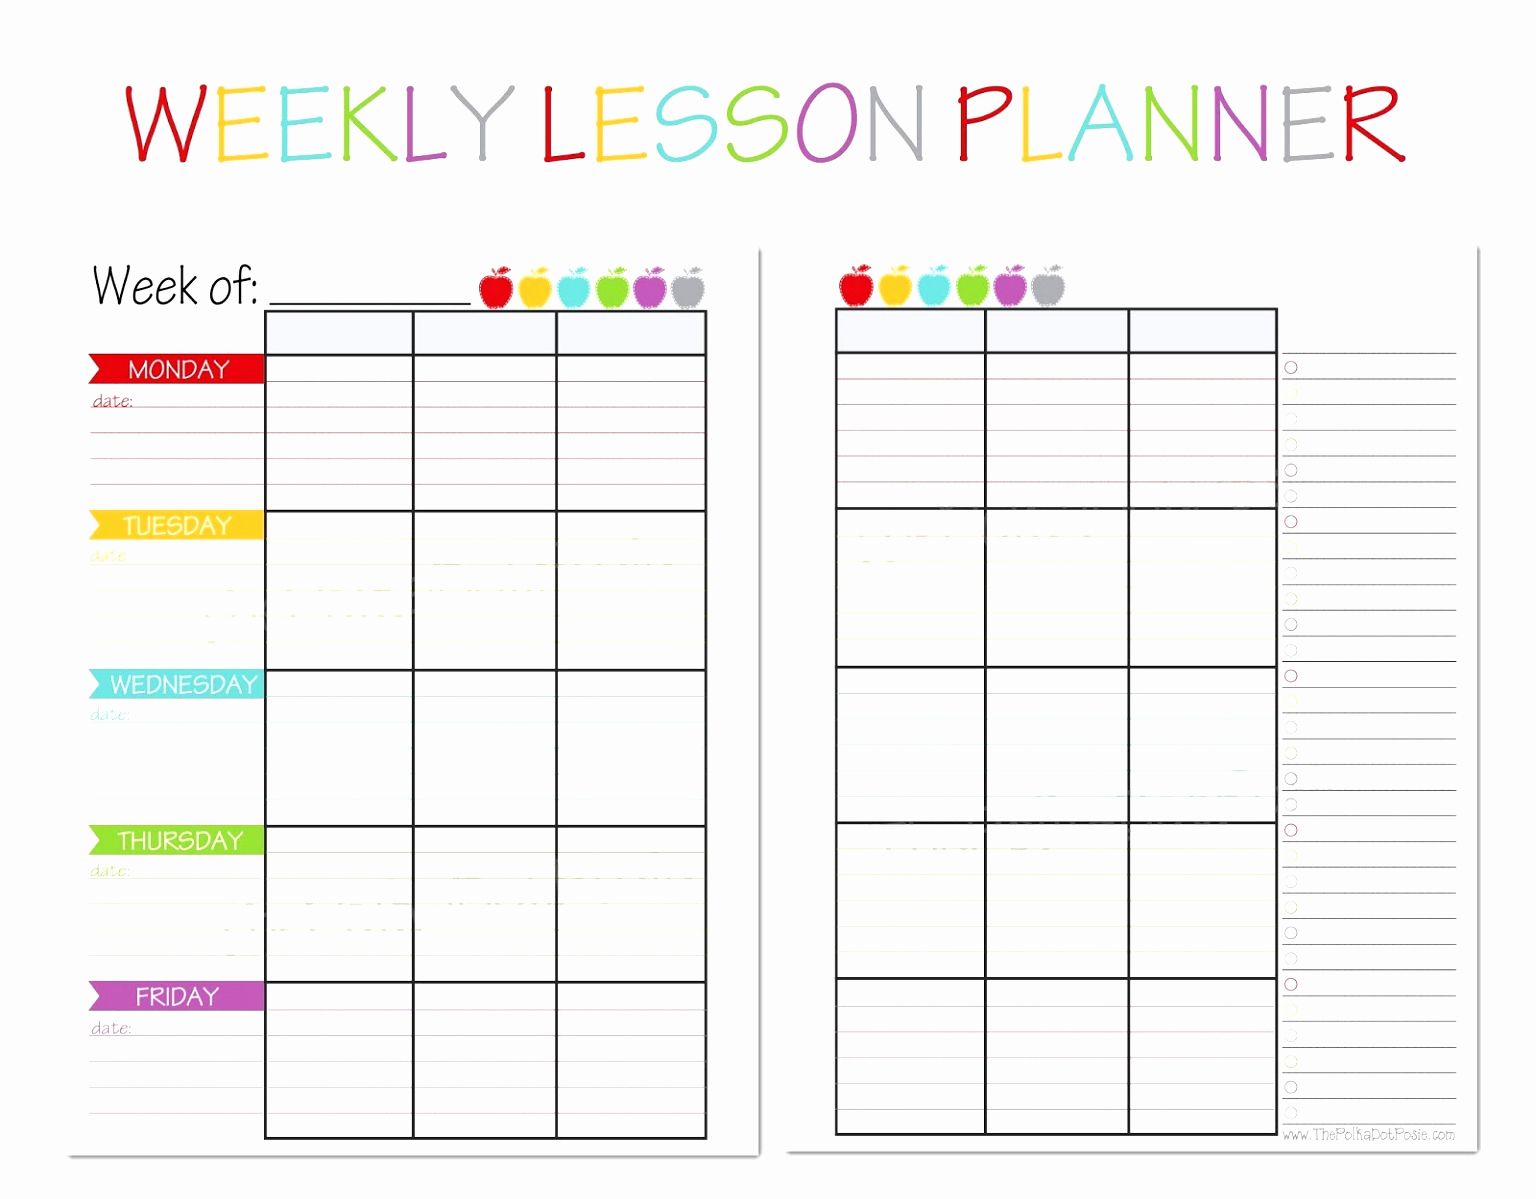 Weekly Lesson Plan Template Word Fresh 10 Weekly Lesson Plan Templates for Elementary Teachers